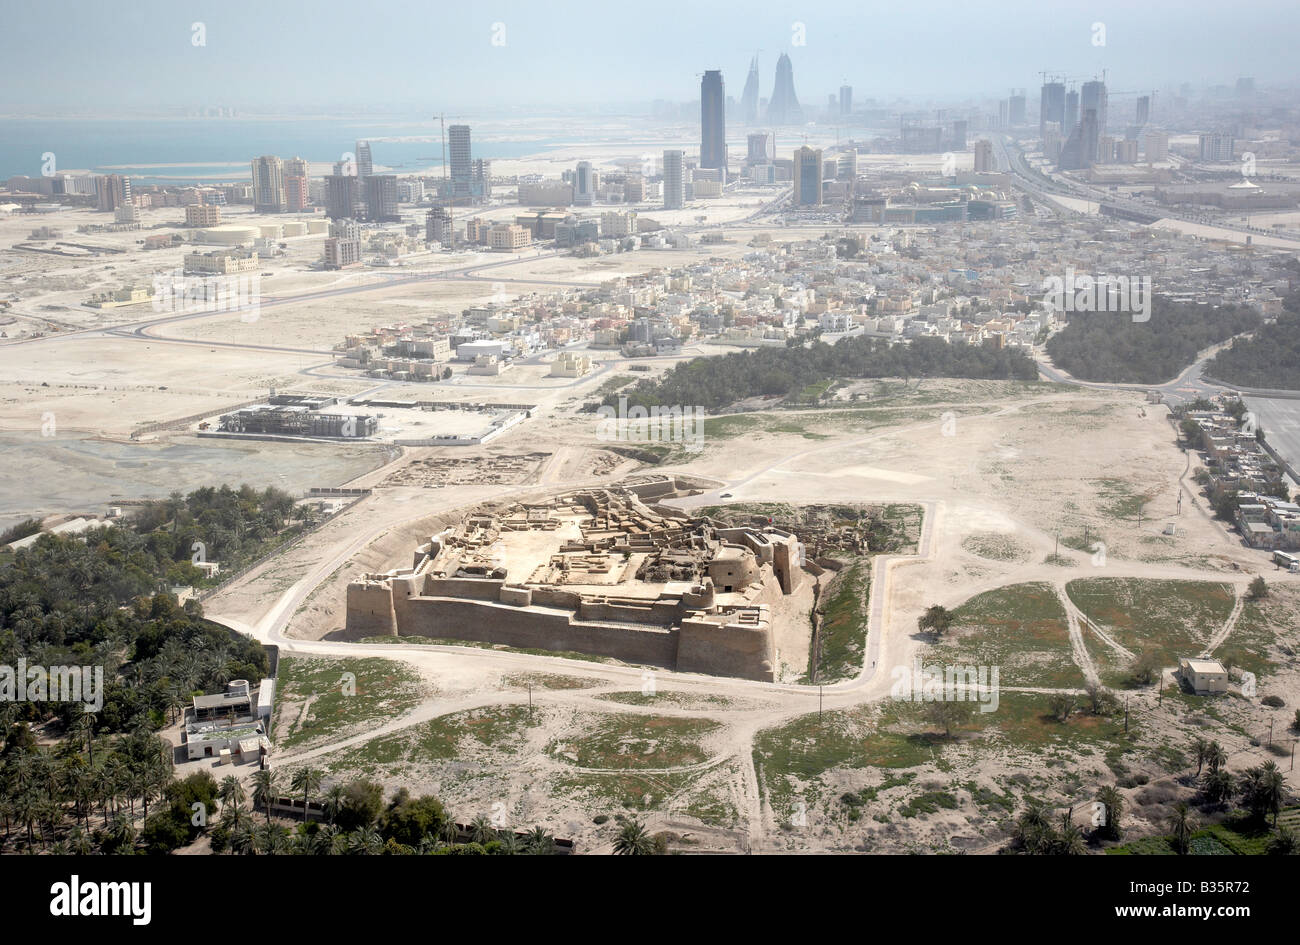 Aerial photo of Bahrain Fort also known as Portuguese Fort or Qal'at al-Bahrain with the skyline of Manama in the background. Stock Photo